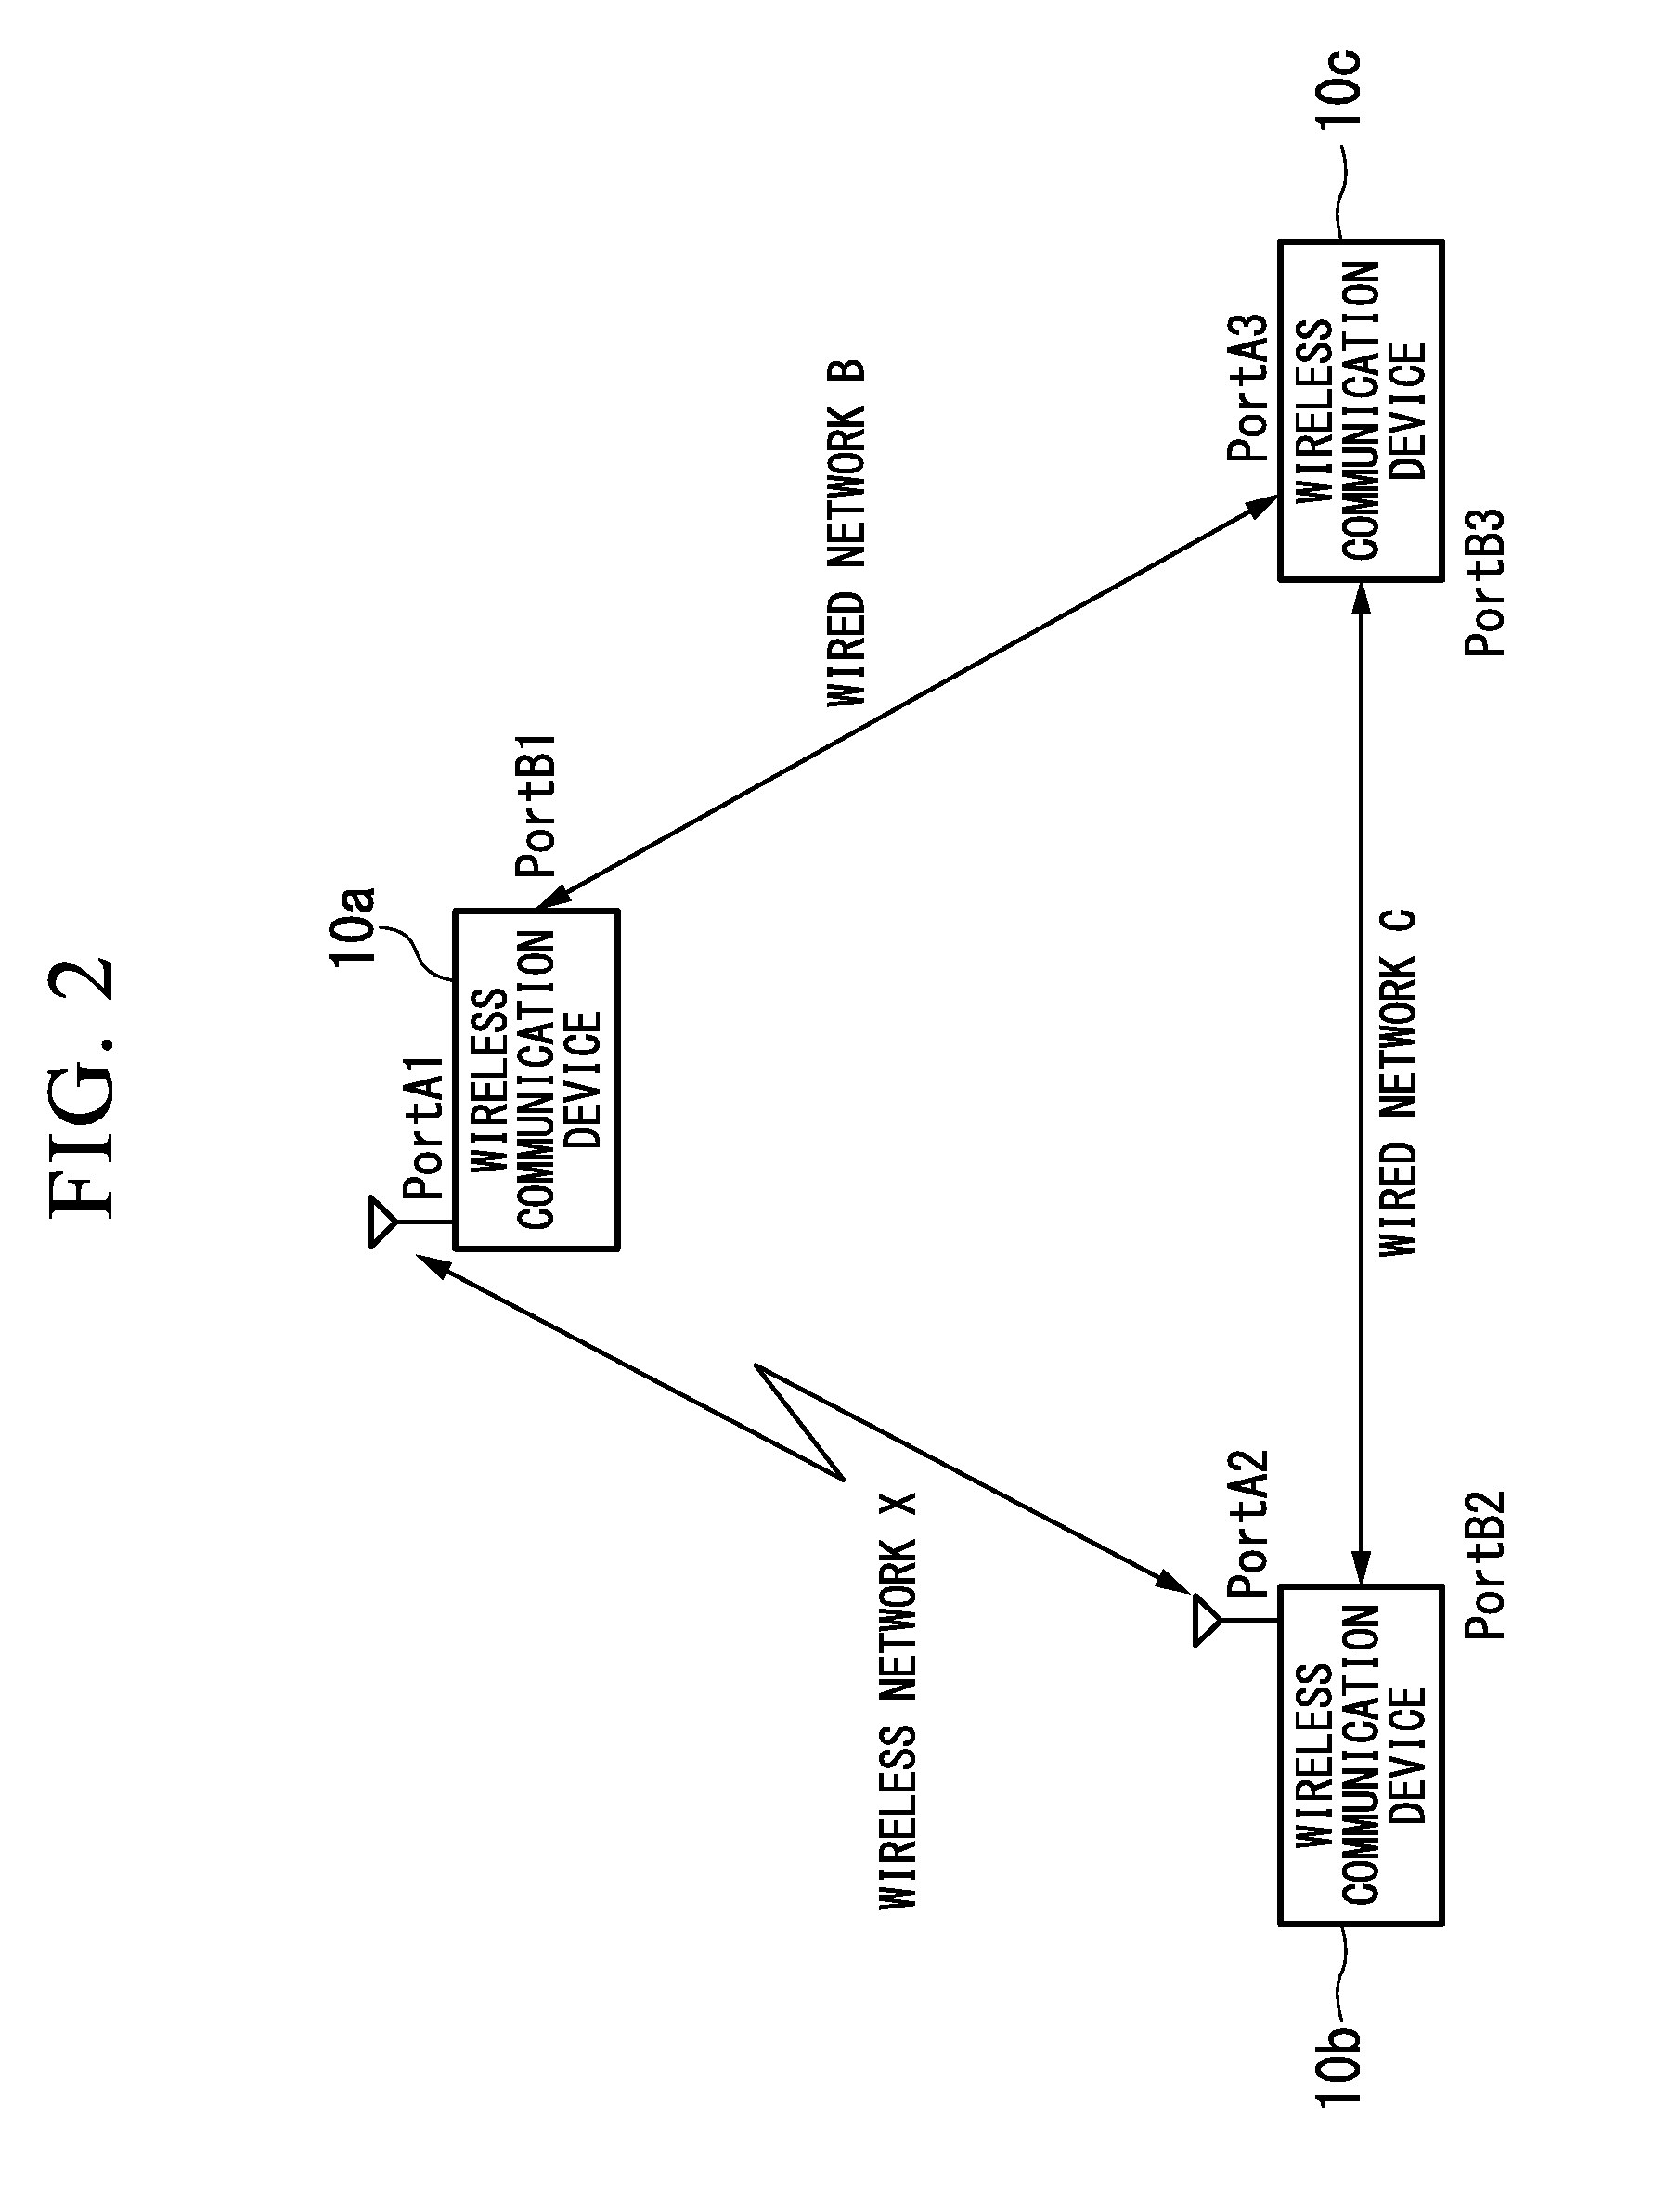 Stp pathway control system applied to wireless communication device having amr function